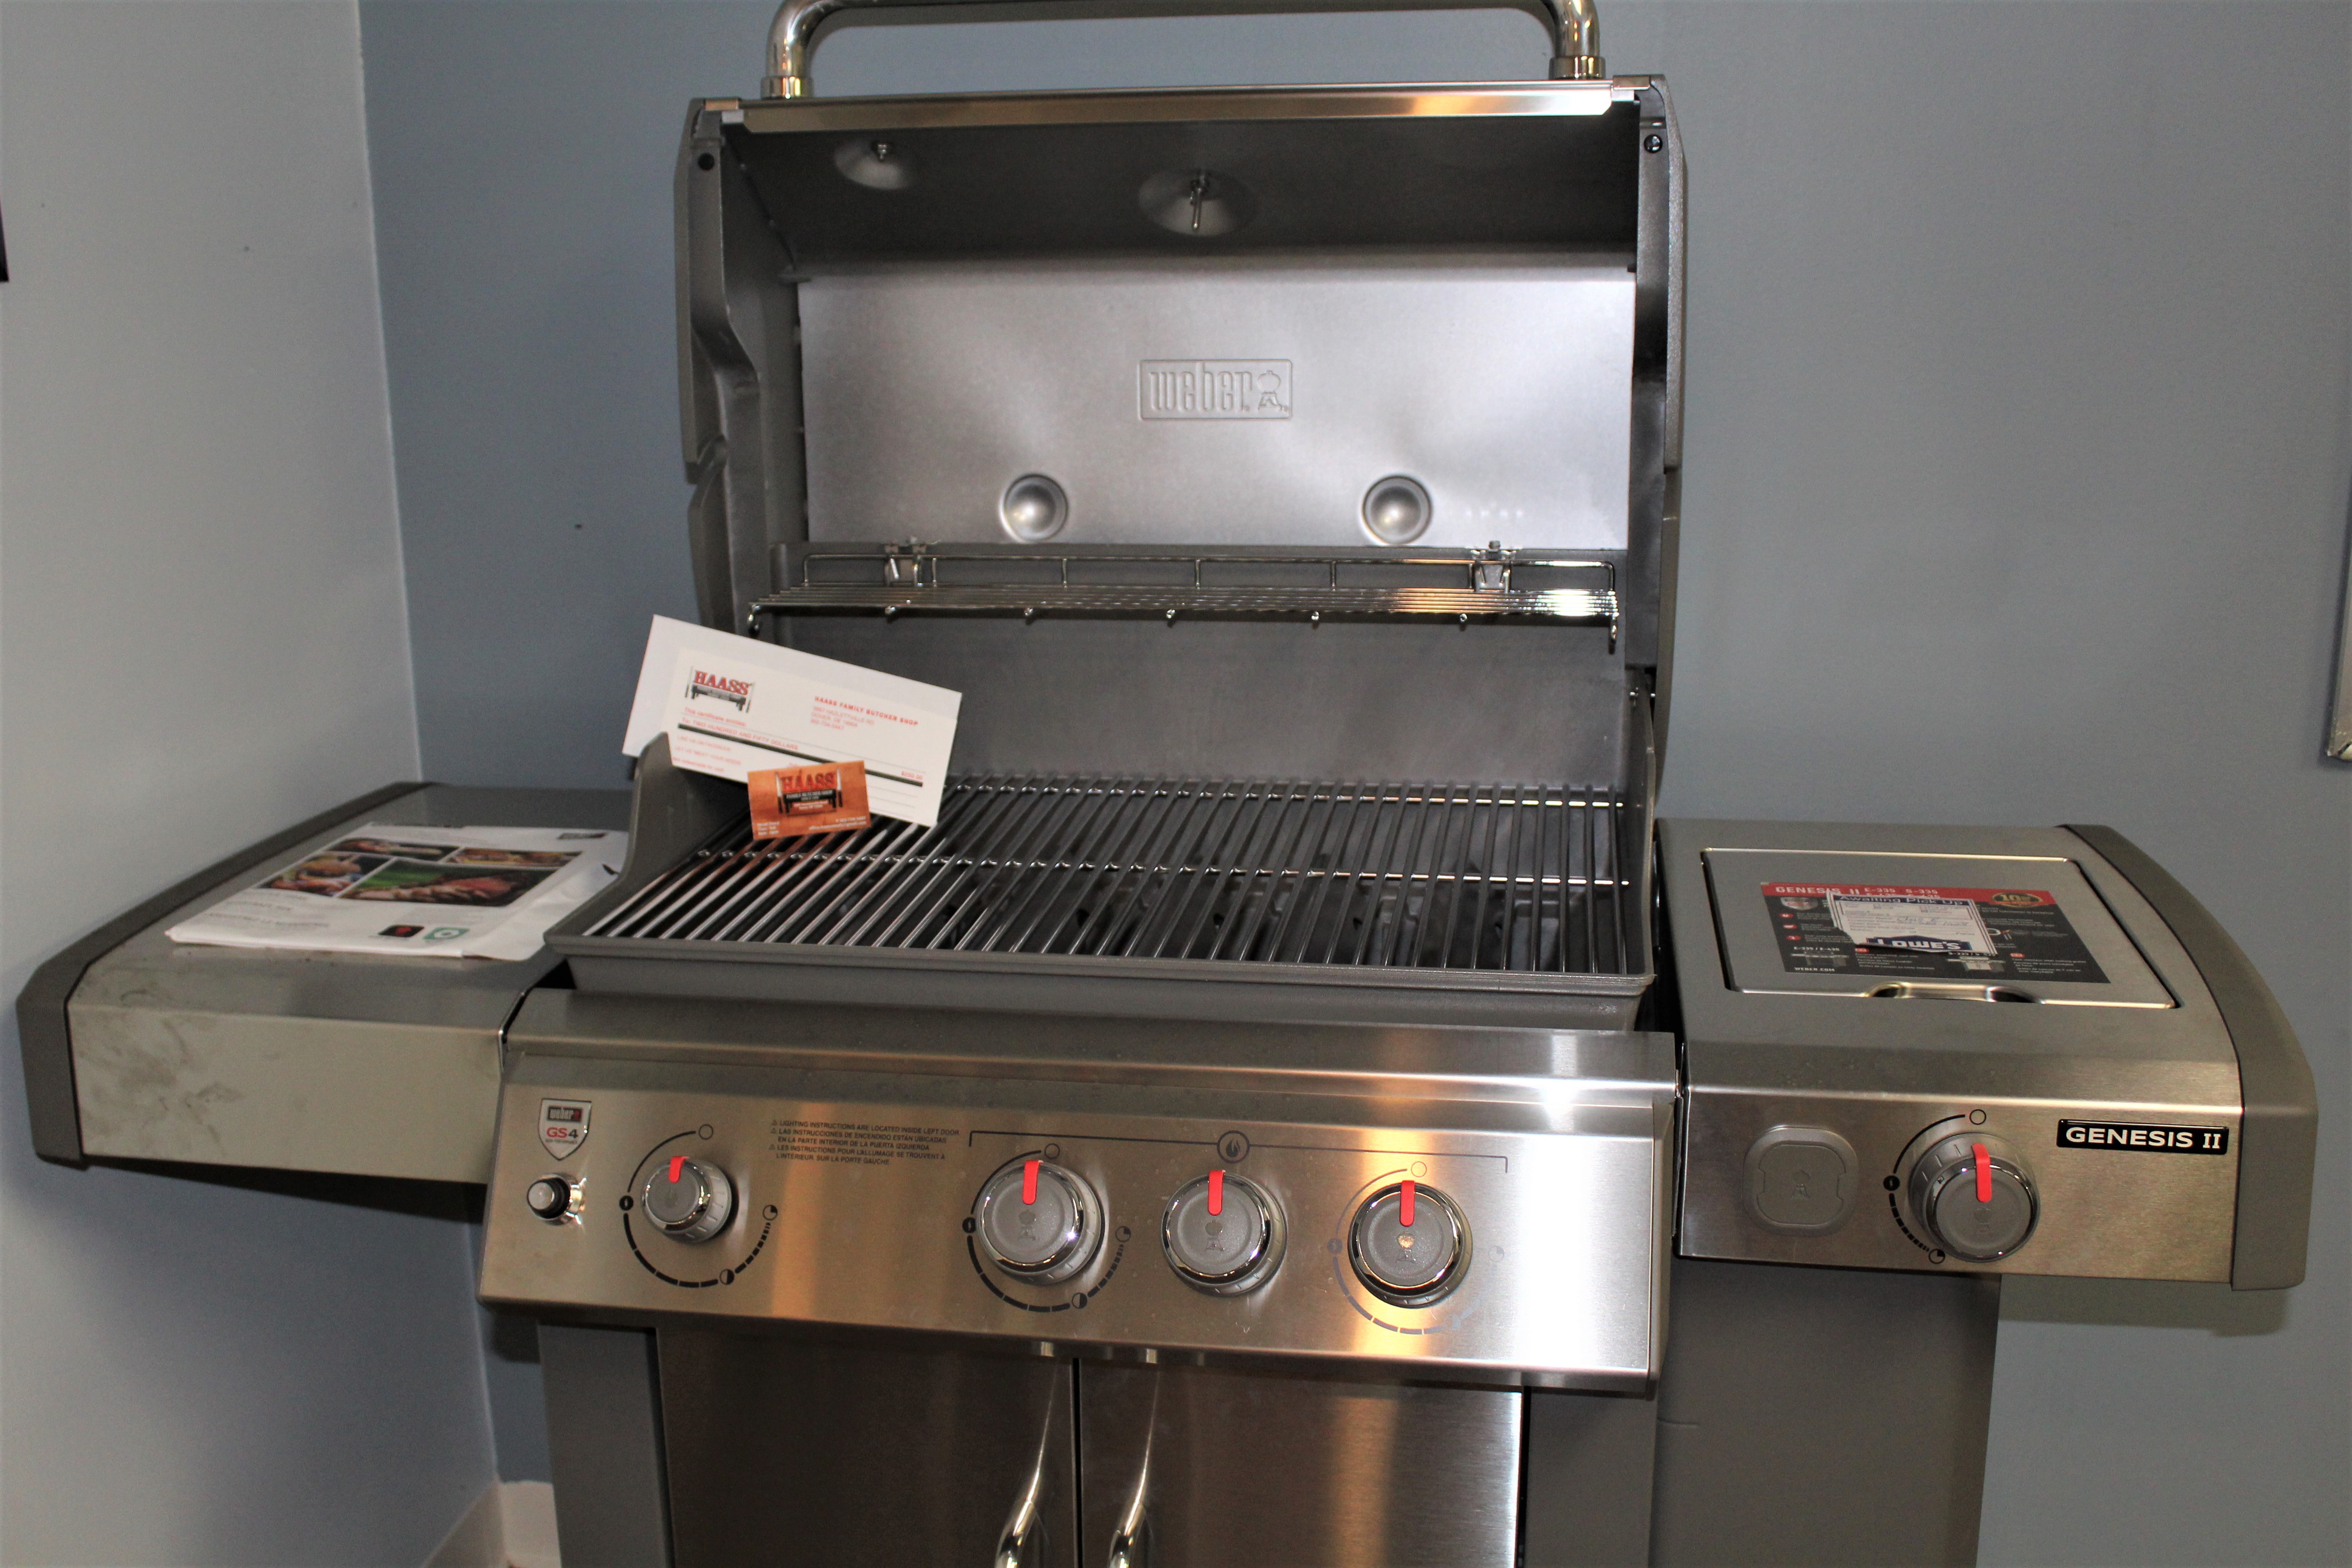 Weber Genesis II Stainless Steel 3-Burner Liquid Propane Gas Grill and $250 Gift Certificate to Haass' Family Butcher Shop - Donated by Dover Federal Credit Union